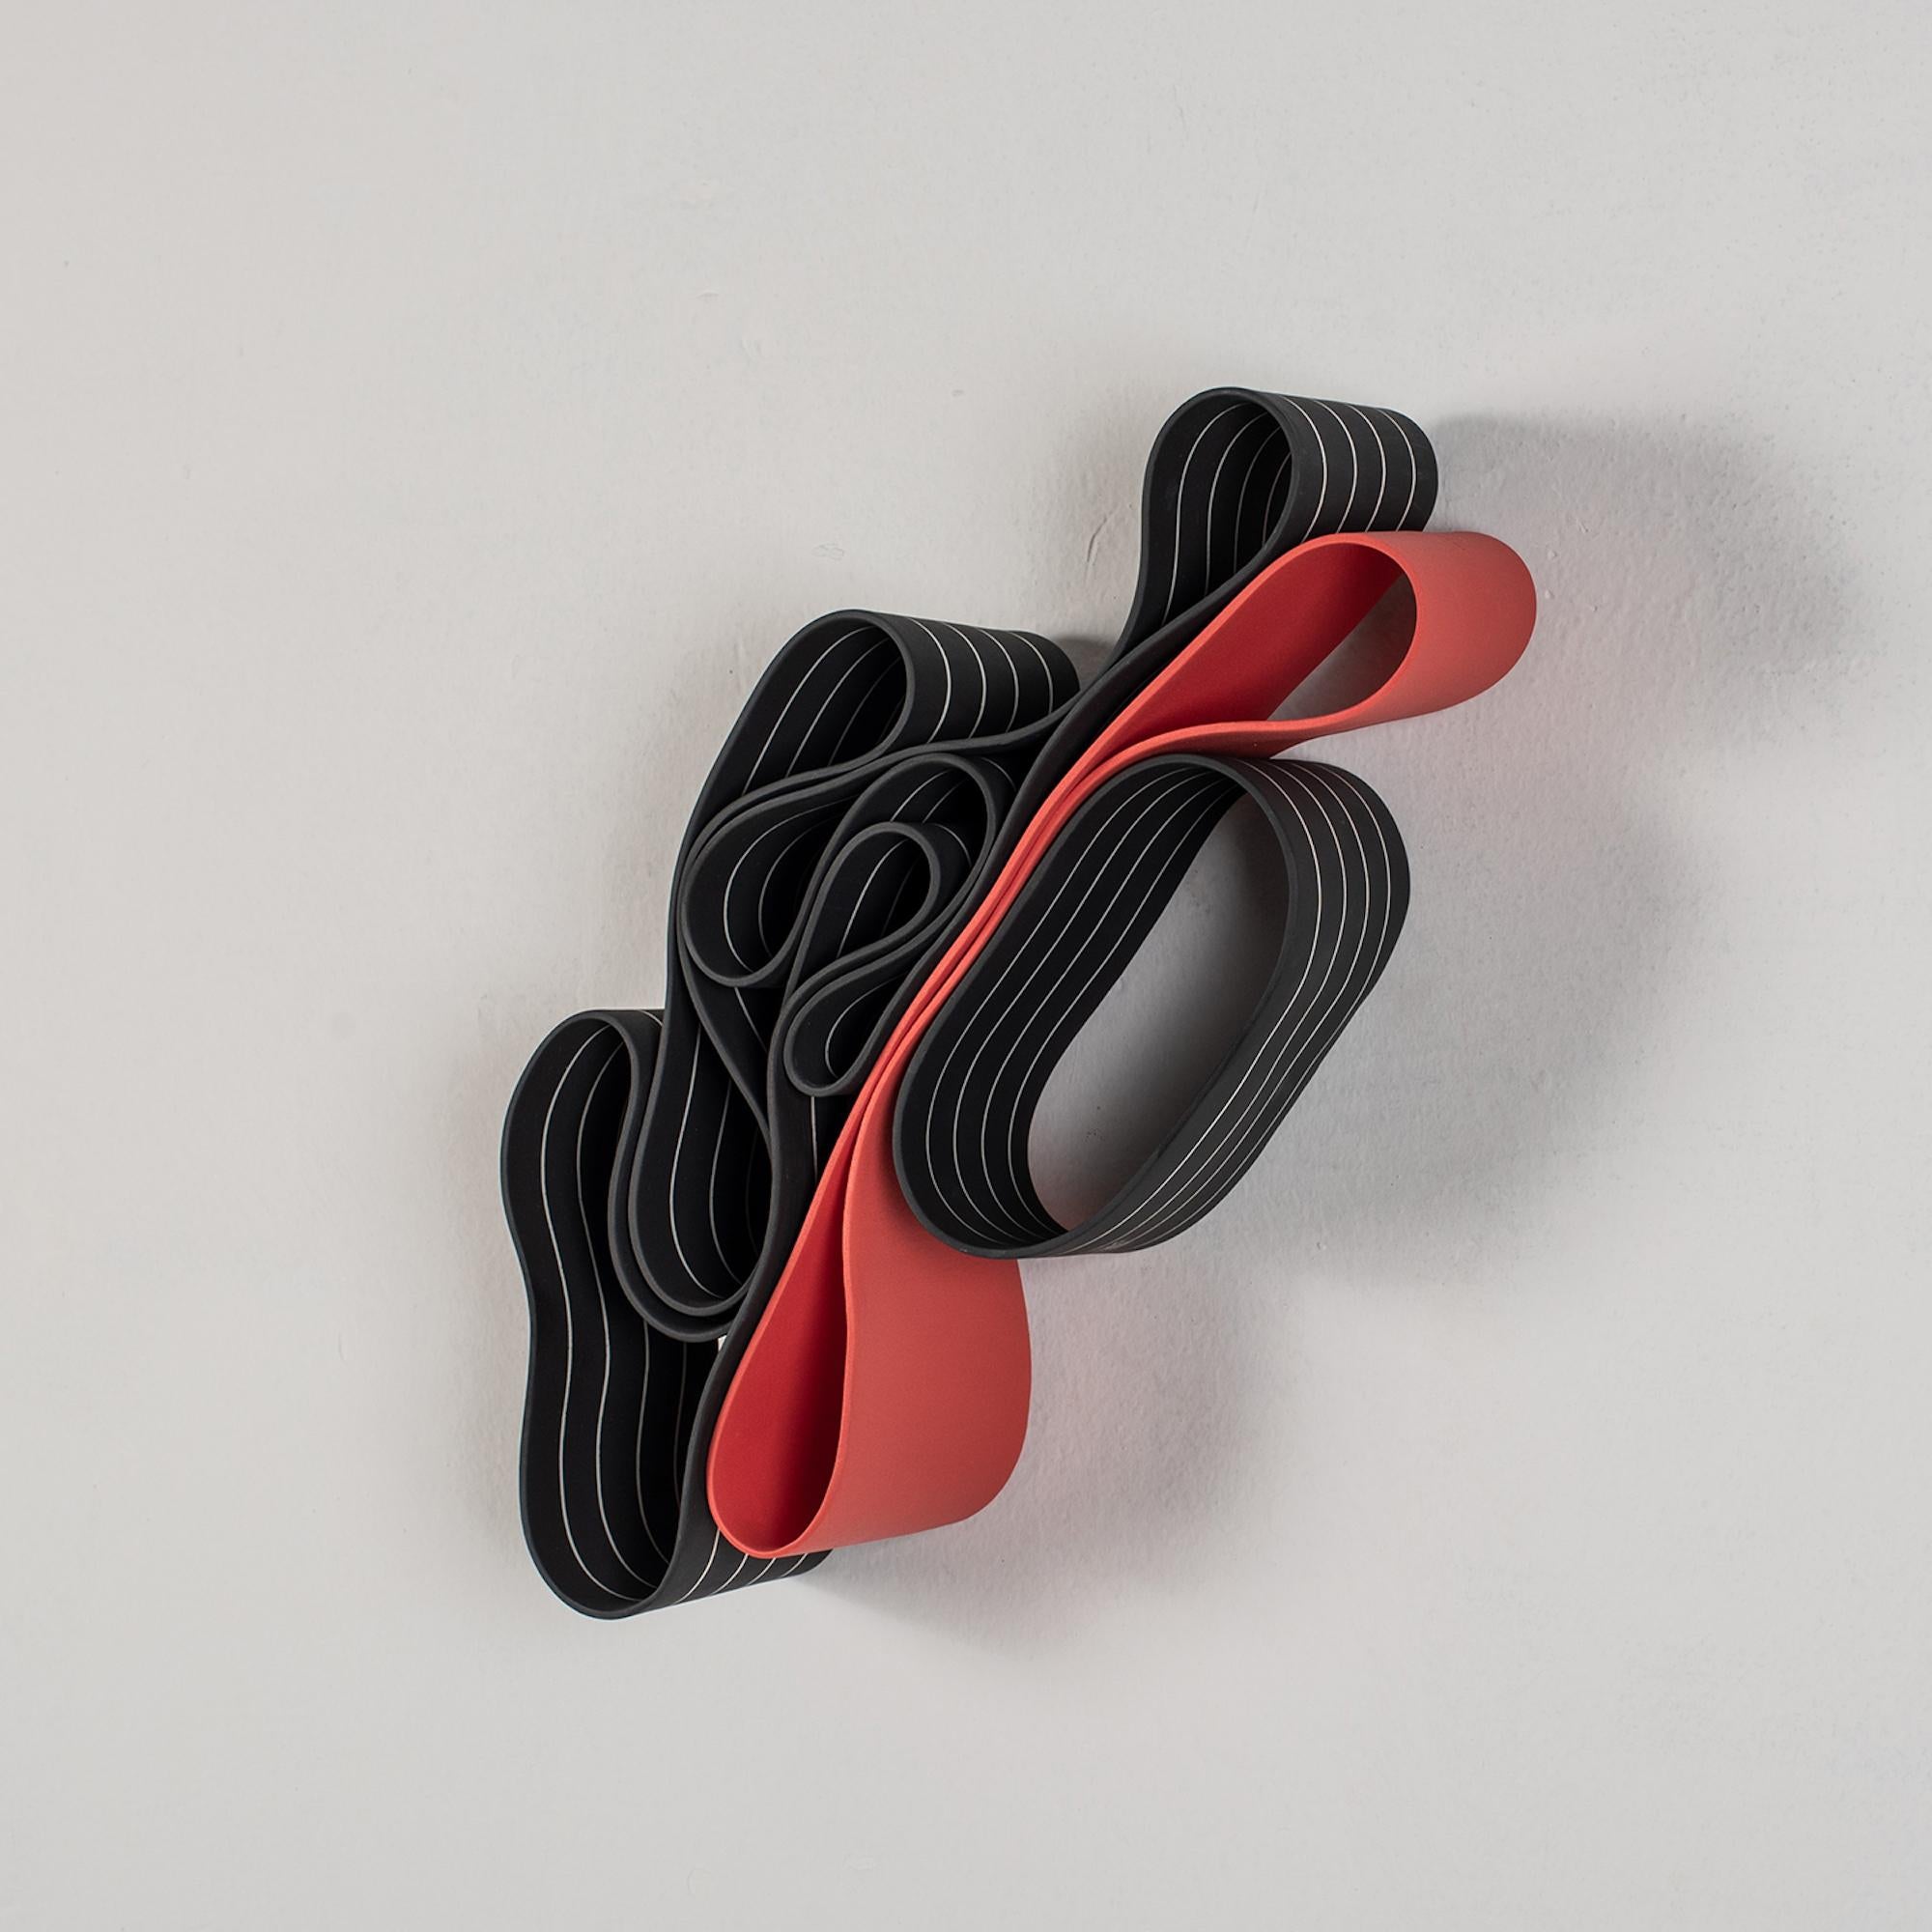 Wall Object #2 by Simcha Even-Chen - Porcelain sculpture, red and black, lines For Sale 2